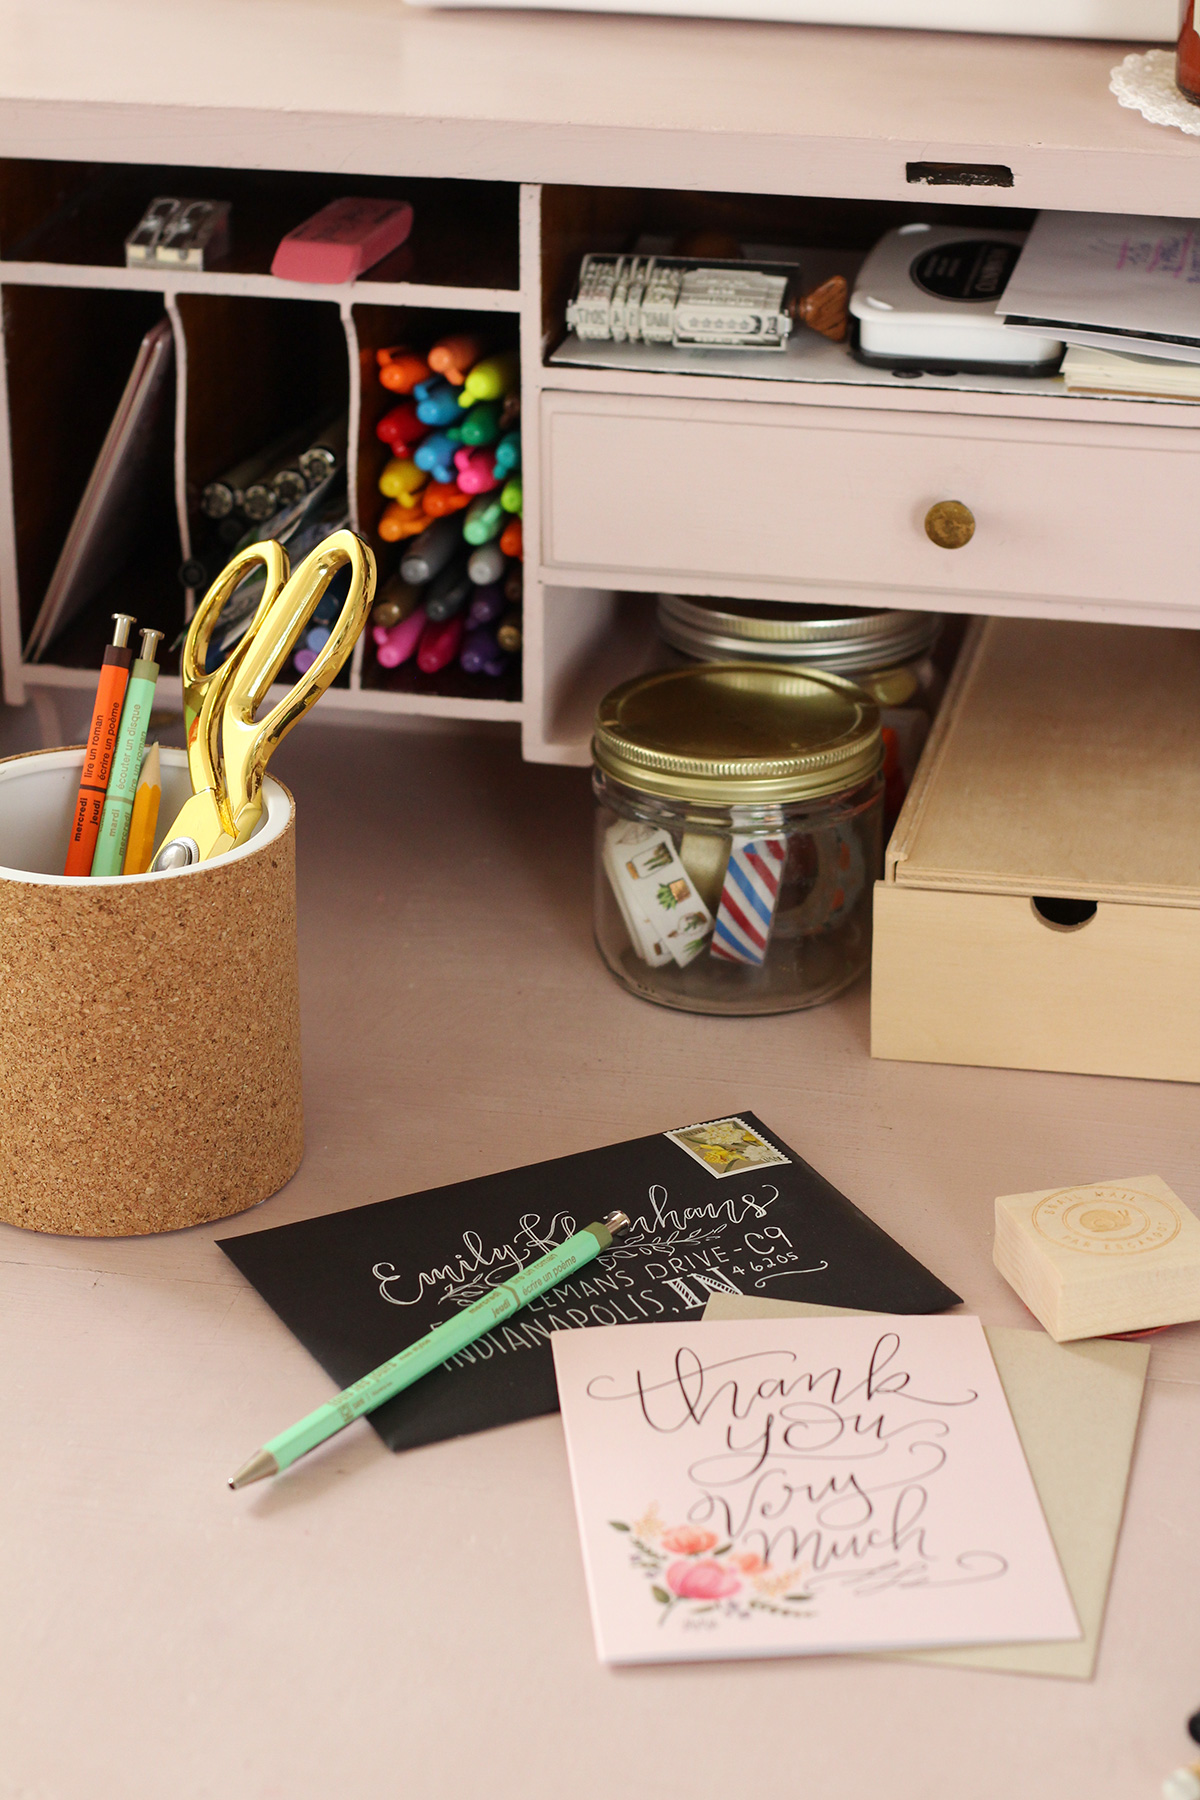 My Antique Letter Writing Desk & Tips For Setting Up Your Own Letter Writing Station